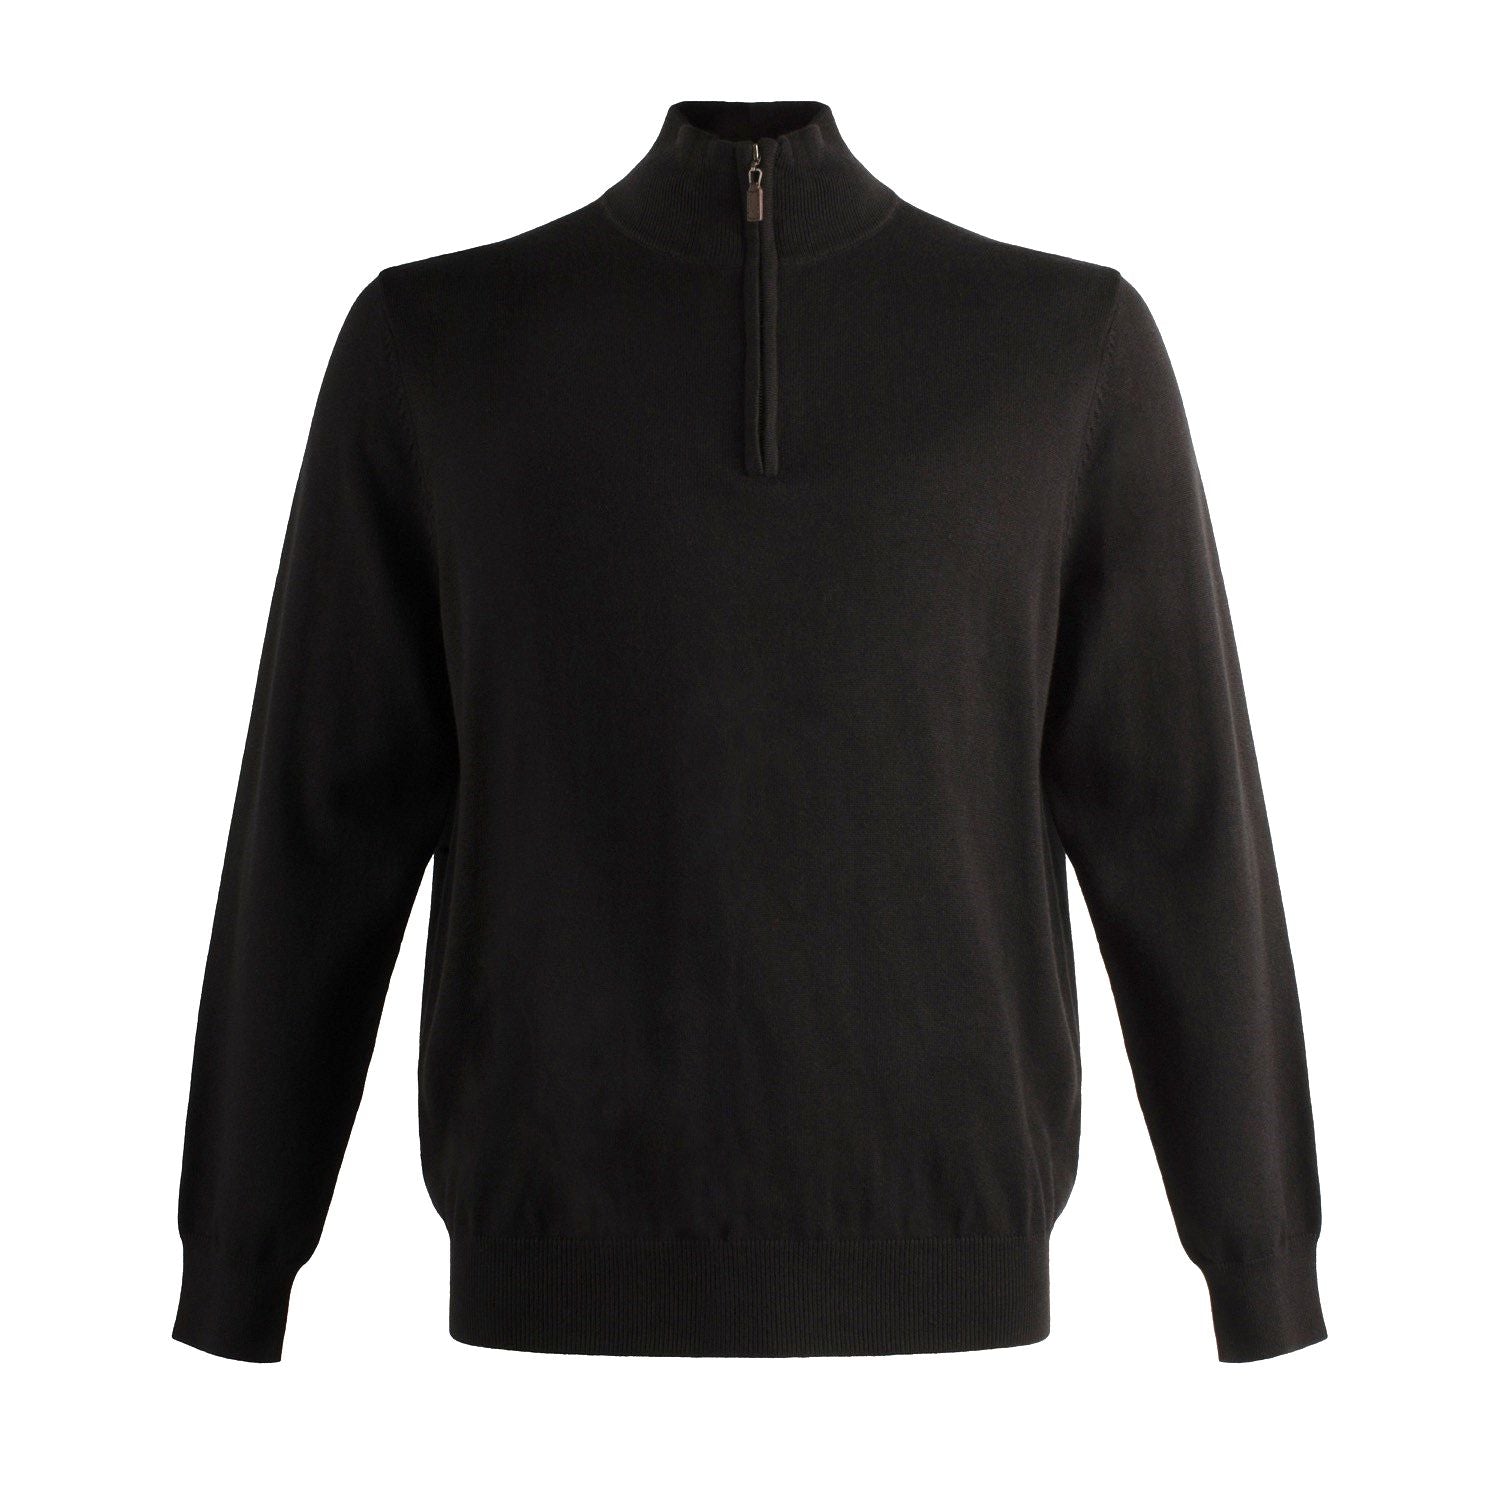 Cotton and Silk Blend Quarter-Zip Mock Neck Elbow Patch Sweater in Black by Viyella